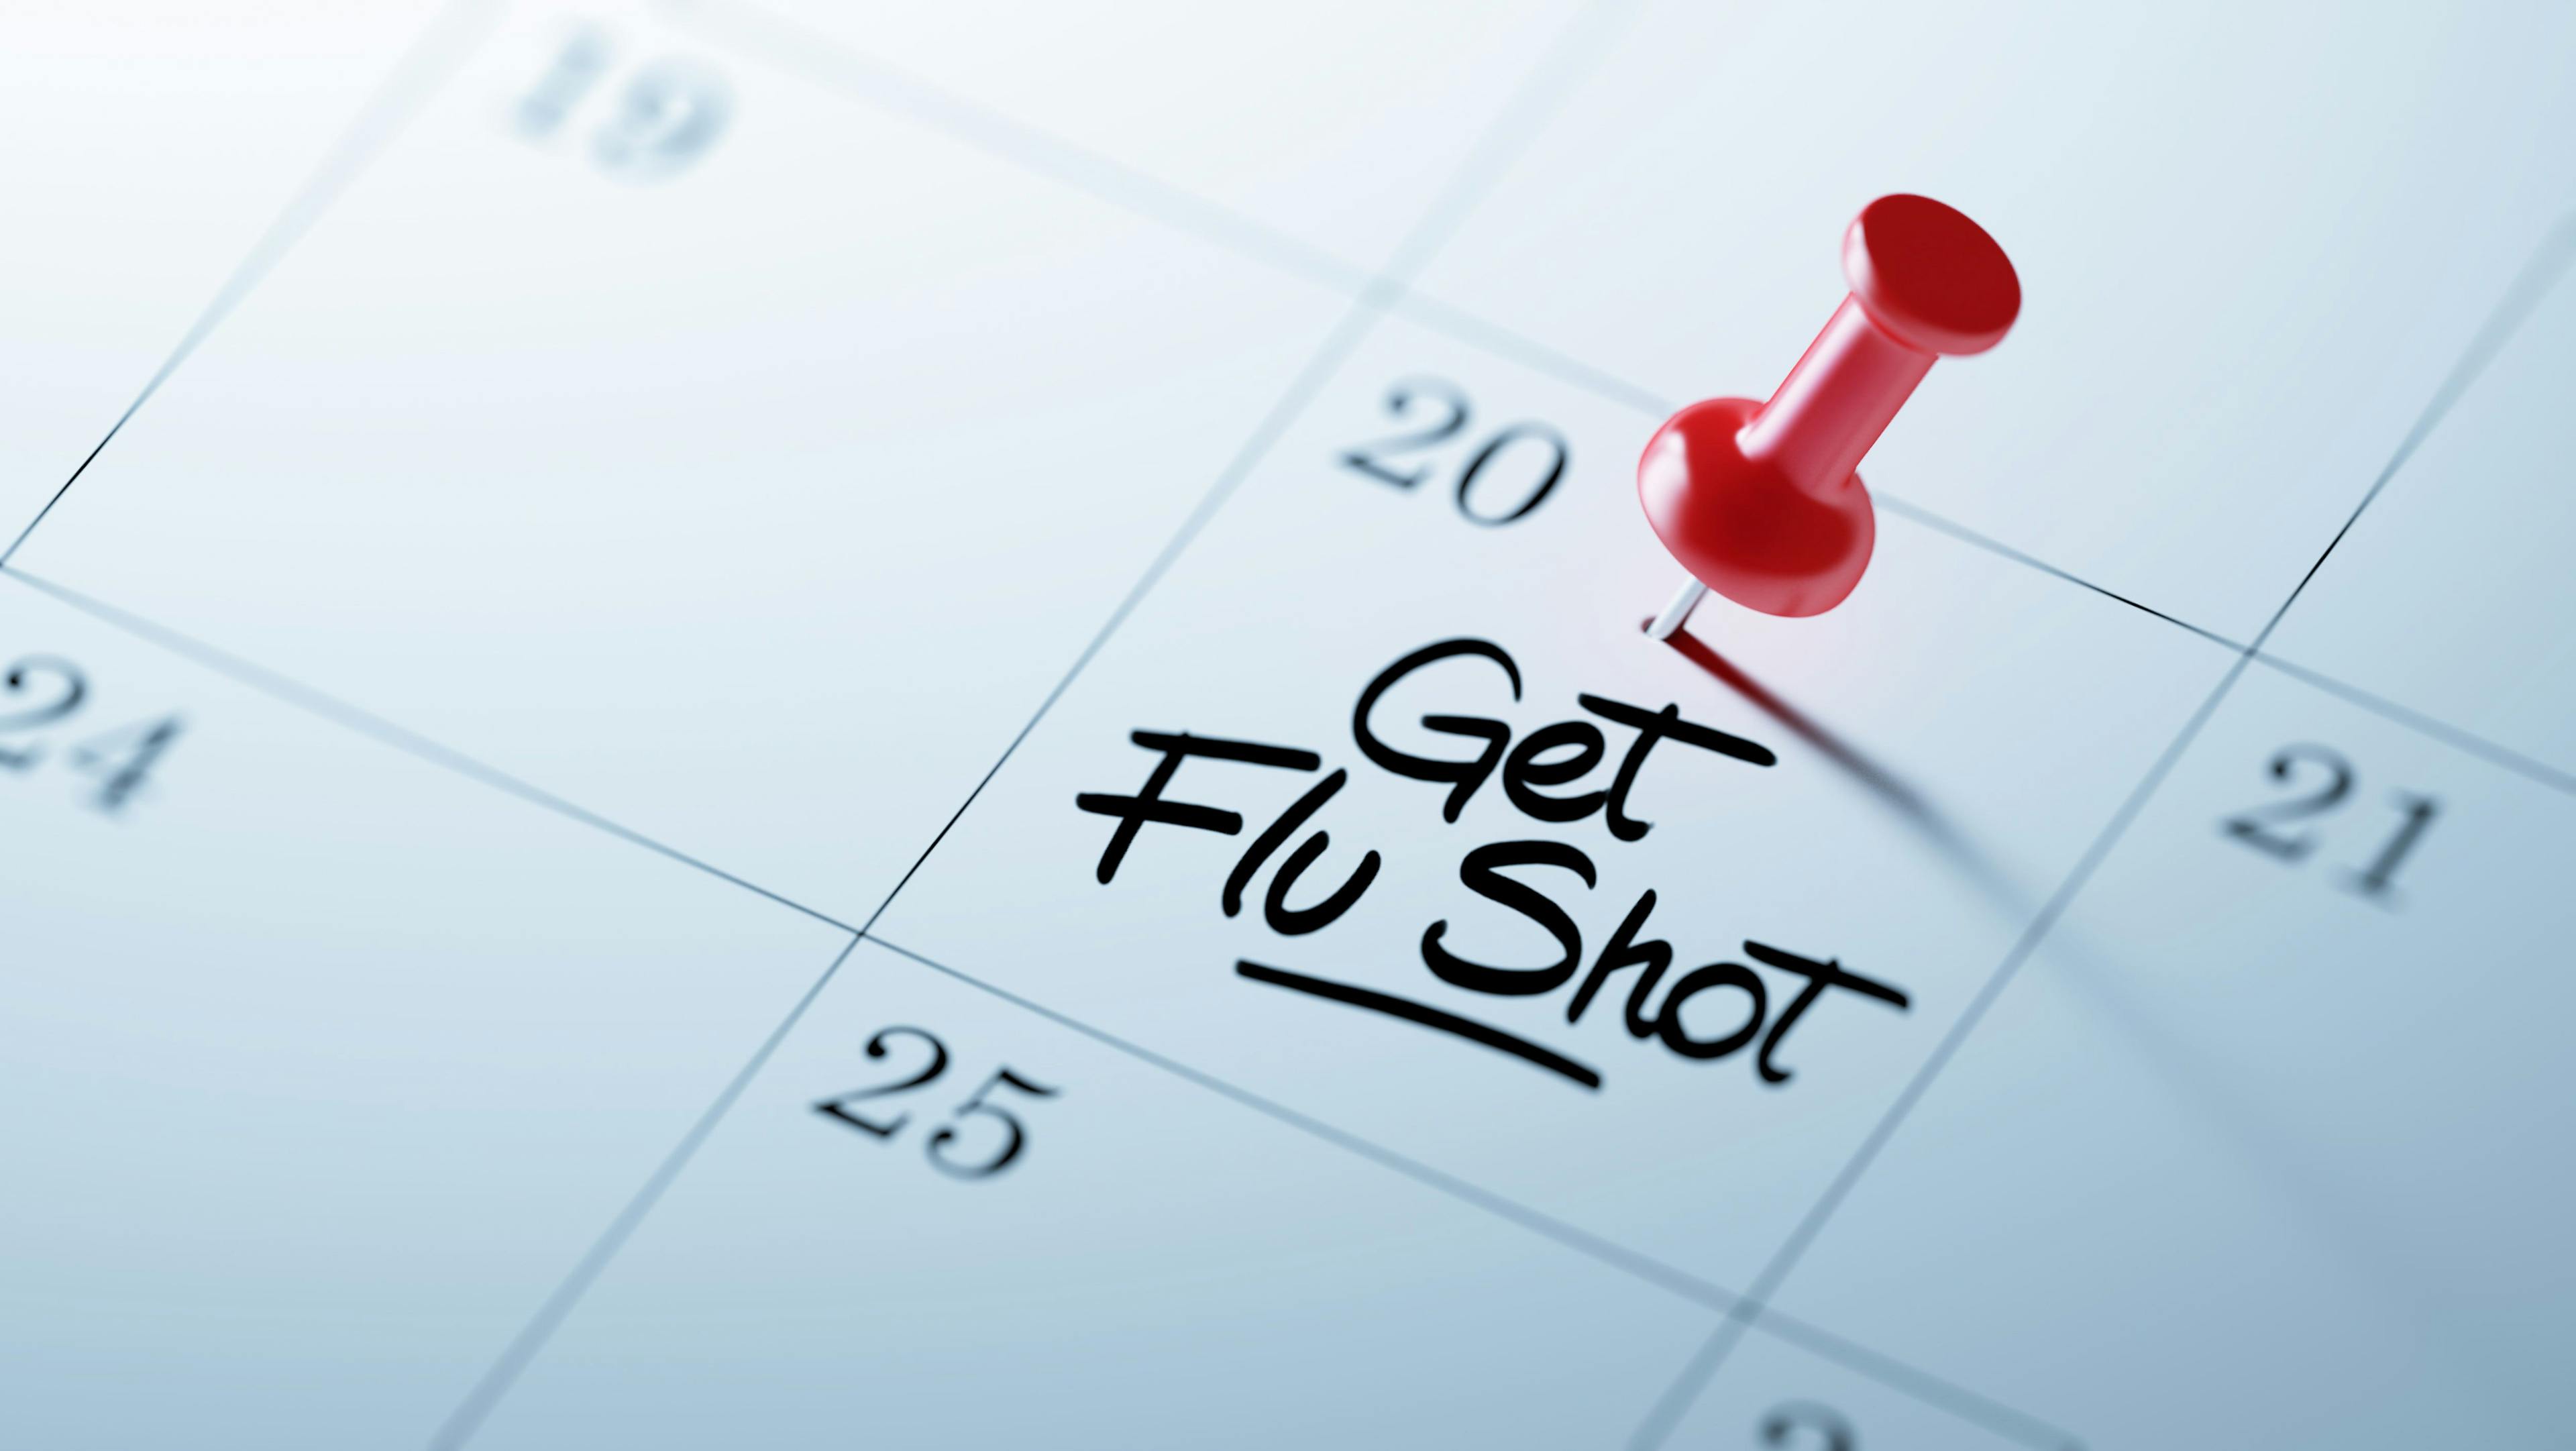 The CDC is urging all eligible persons to receive a flu shot, but a new survey shows fewer adults are planning to get the vaccine this season.